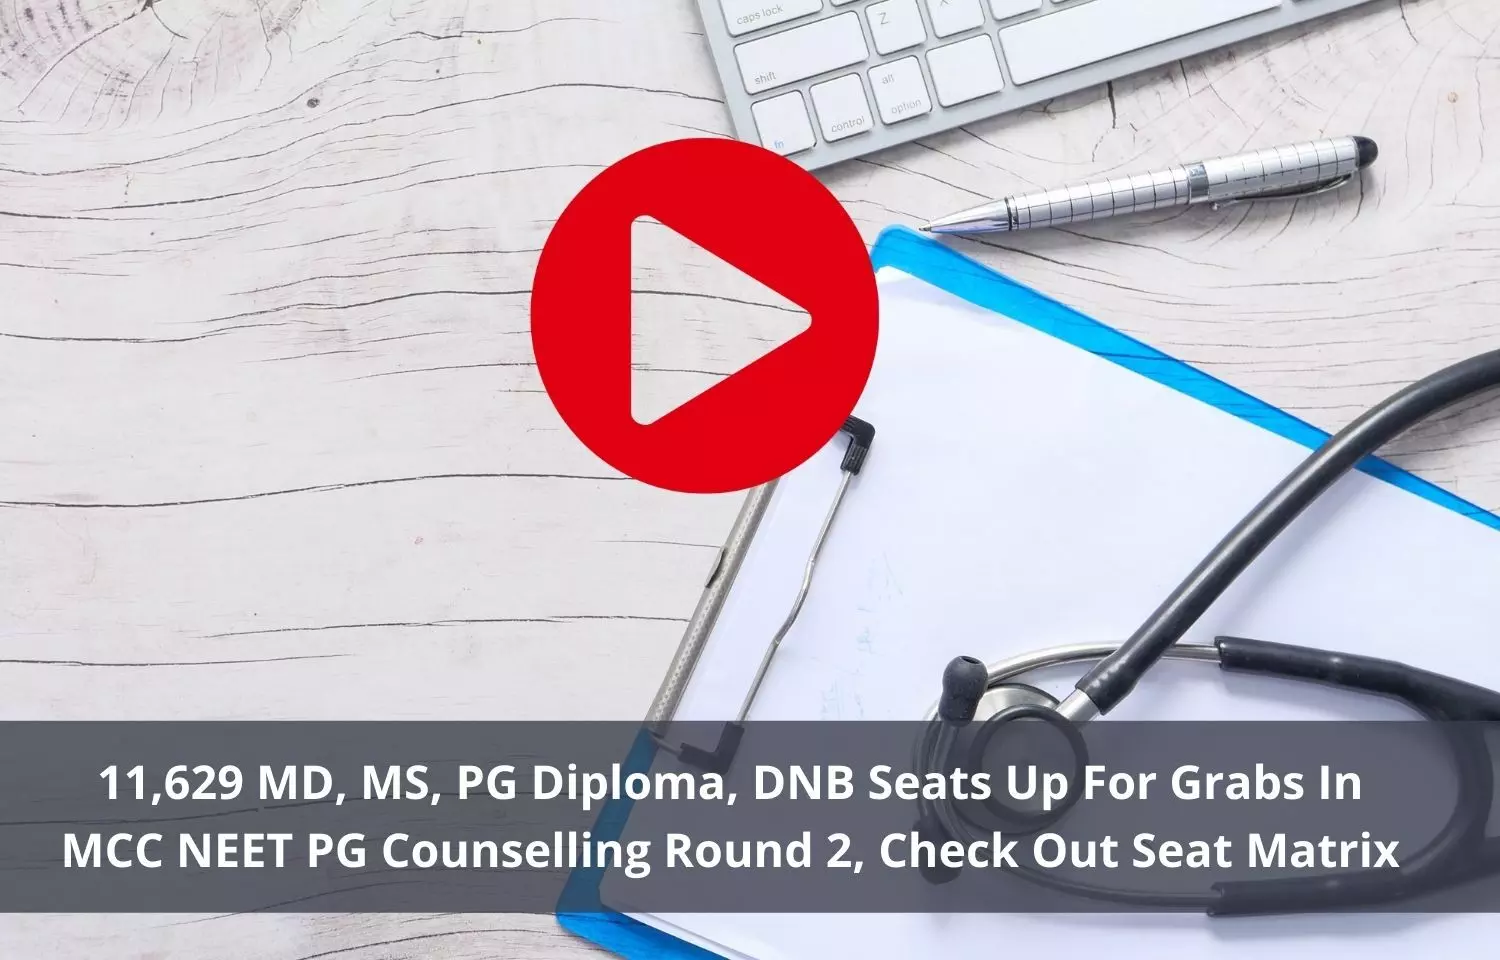 NEET PG Counselling: 11,629 MD, MS, PG Diploma, DNB Seats available in Round 2